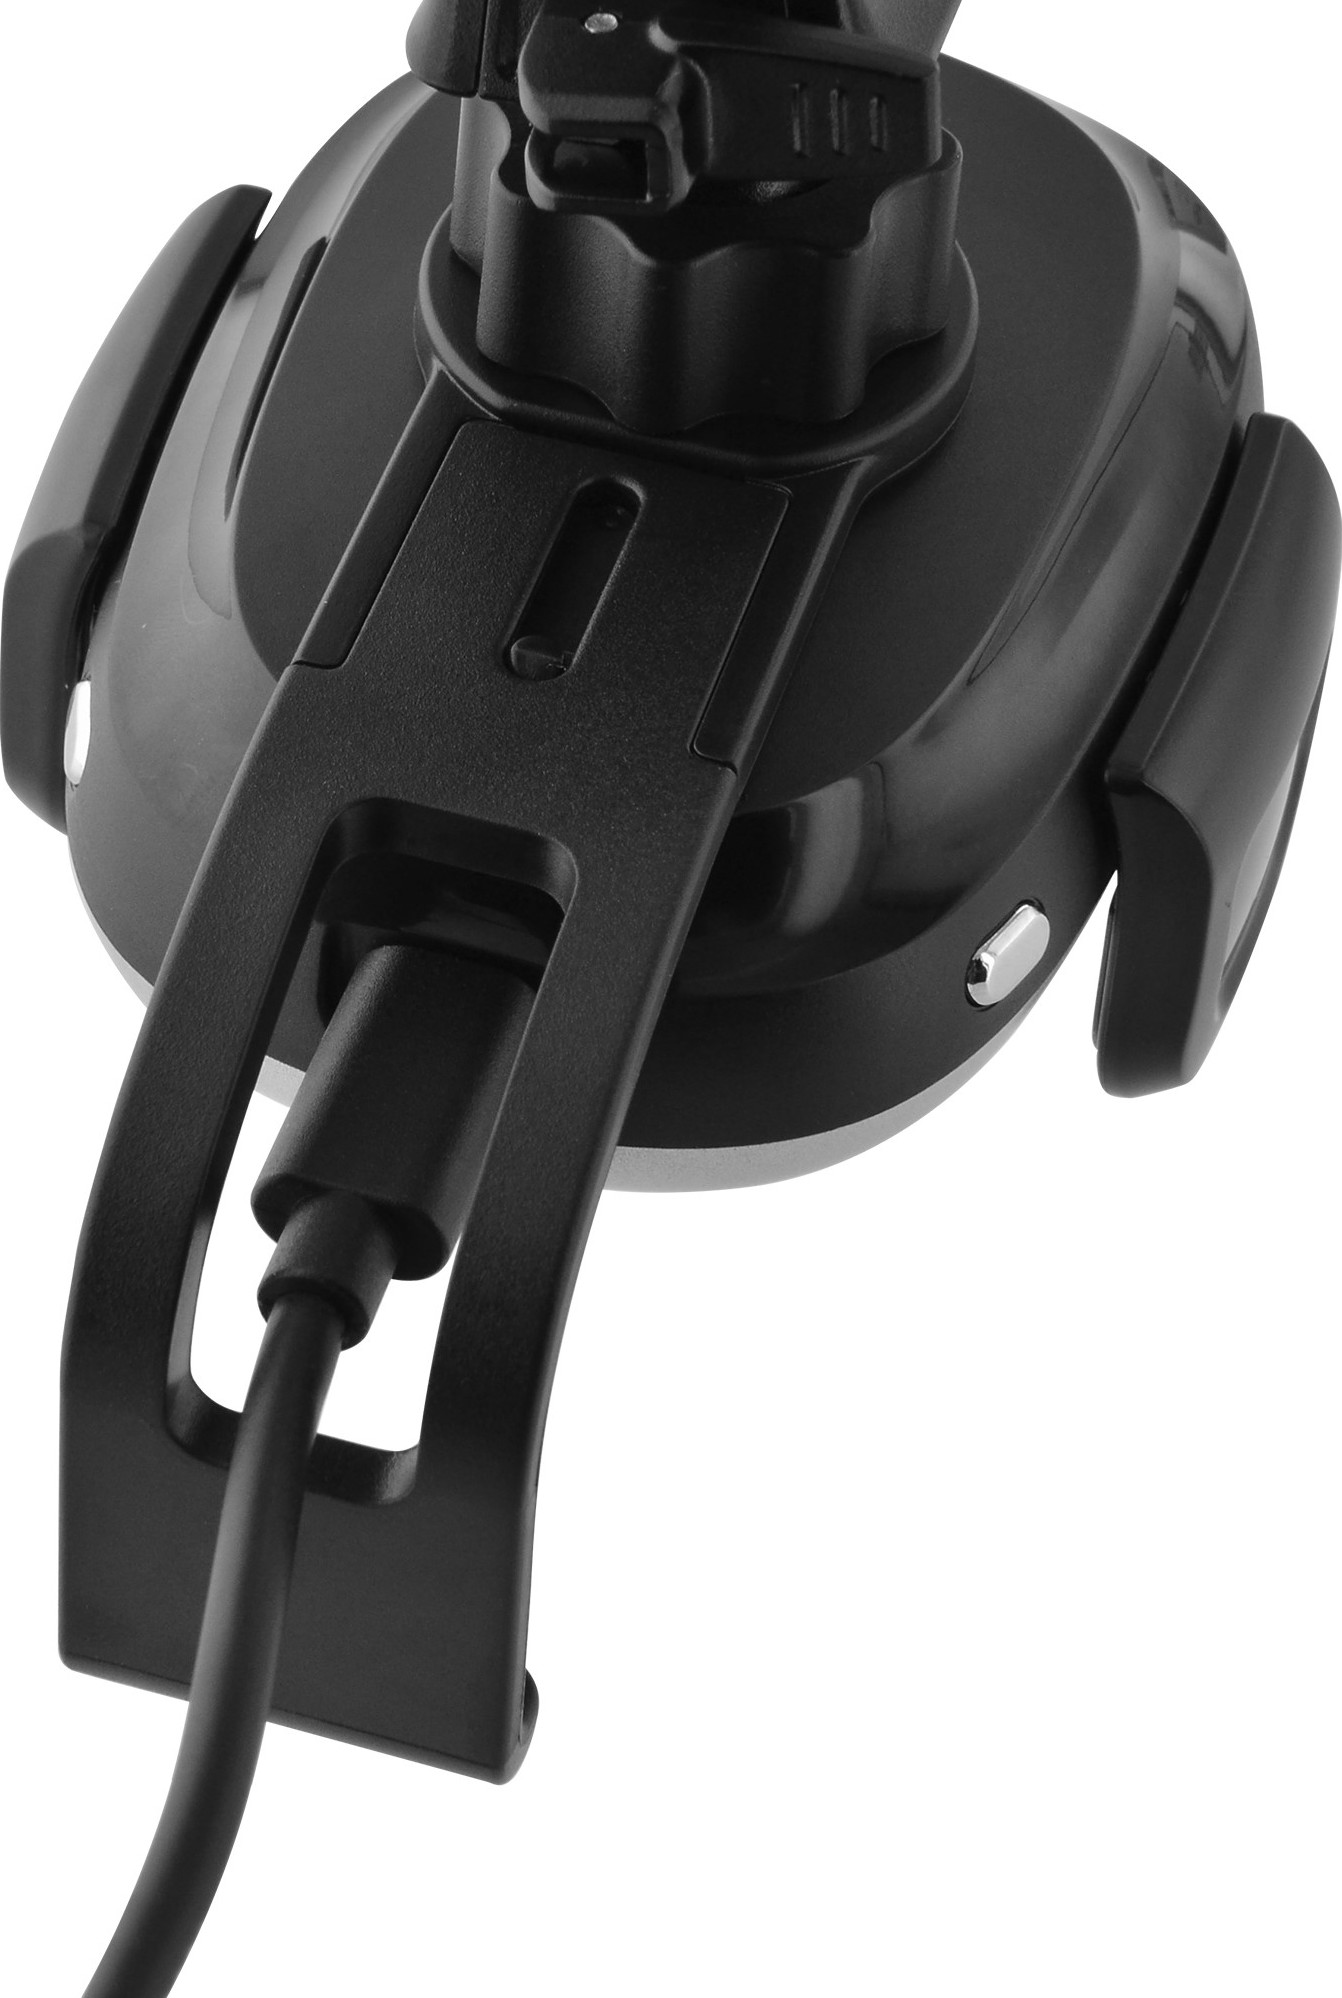 Azuri Qi automatic wireless (inductive) car charger 2amp black